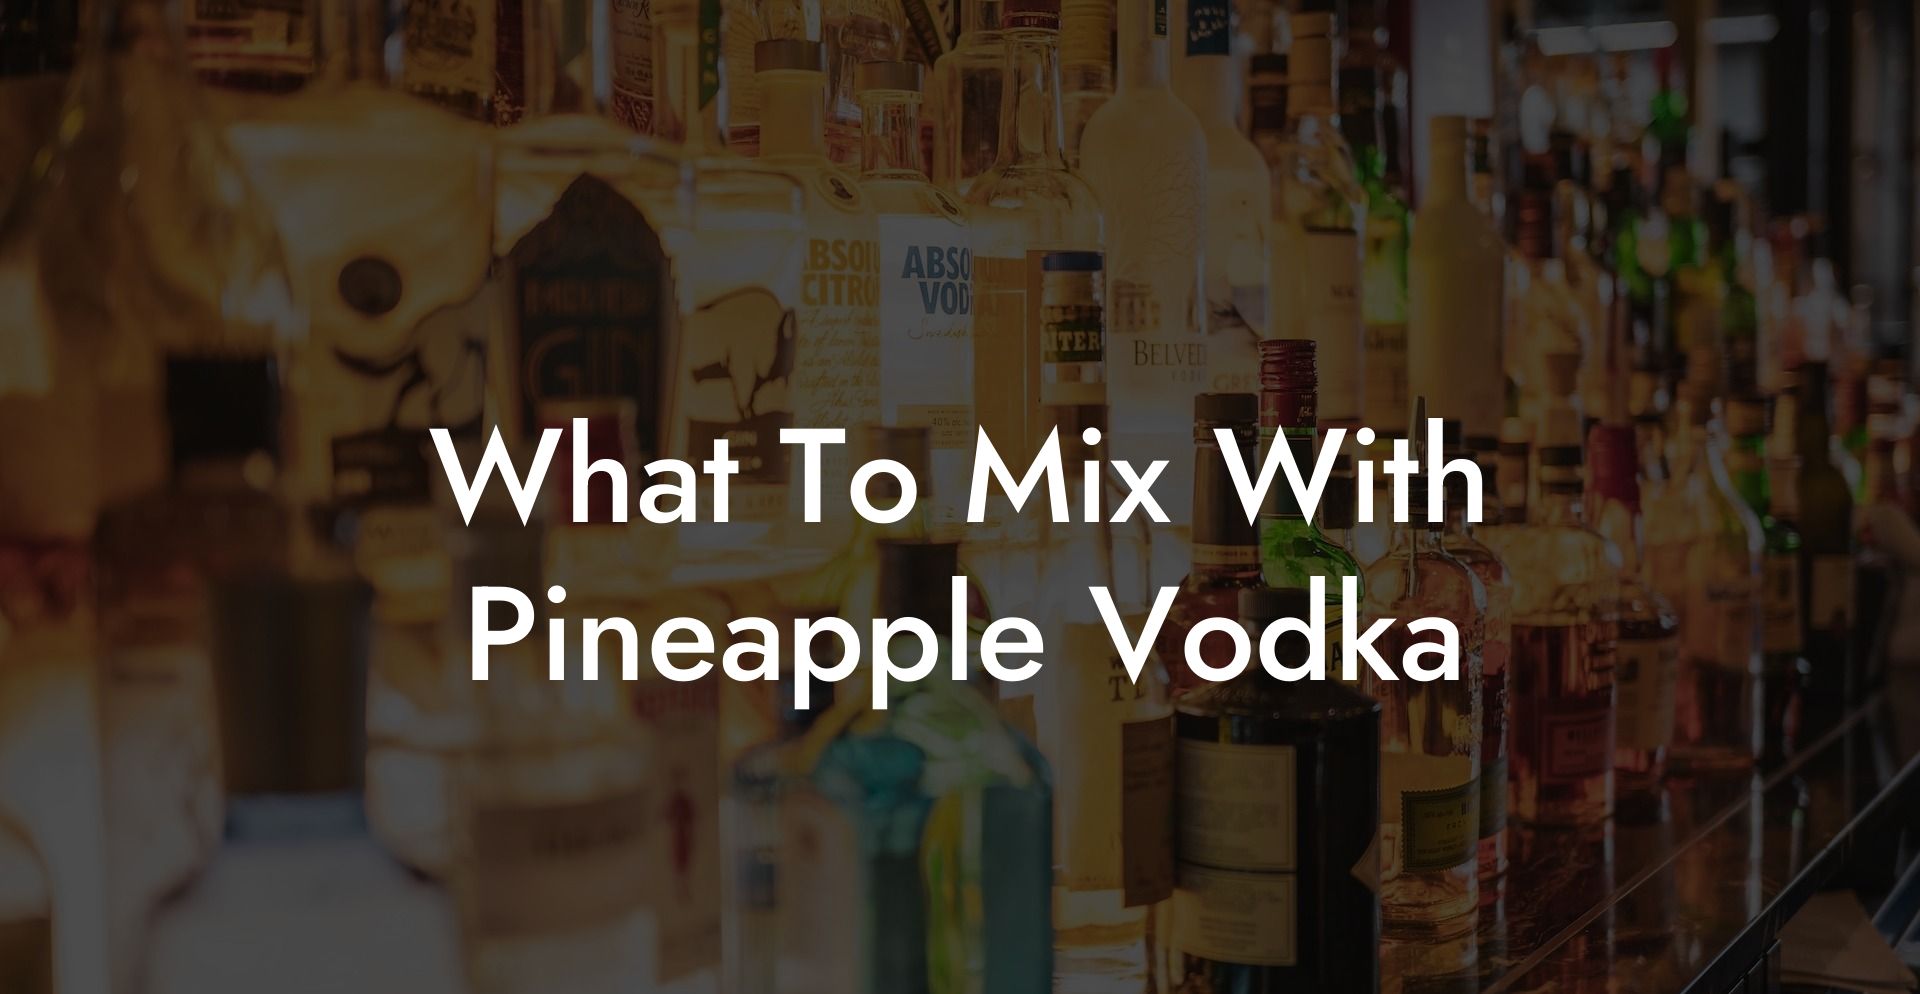 What To Mix With Pineapple Vodka